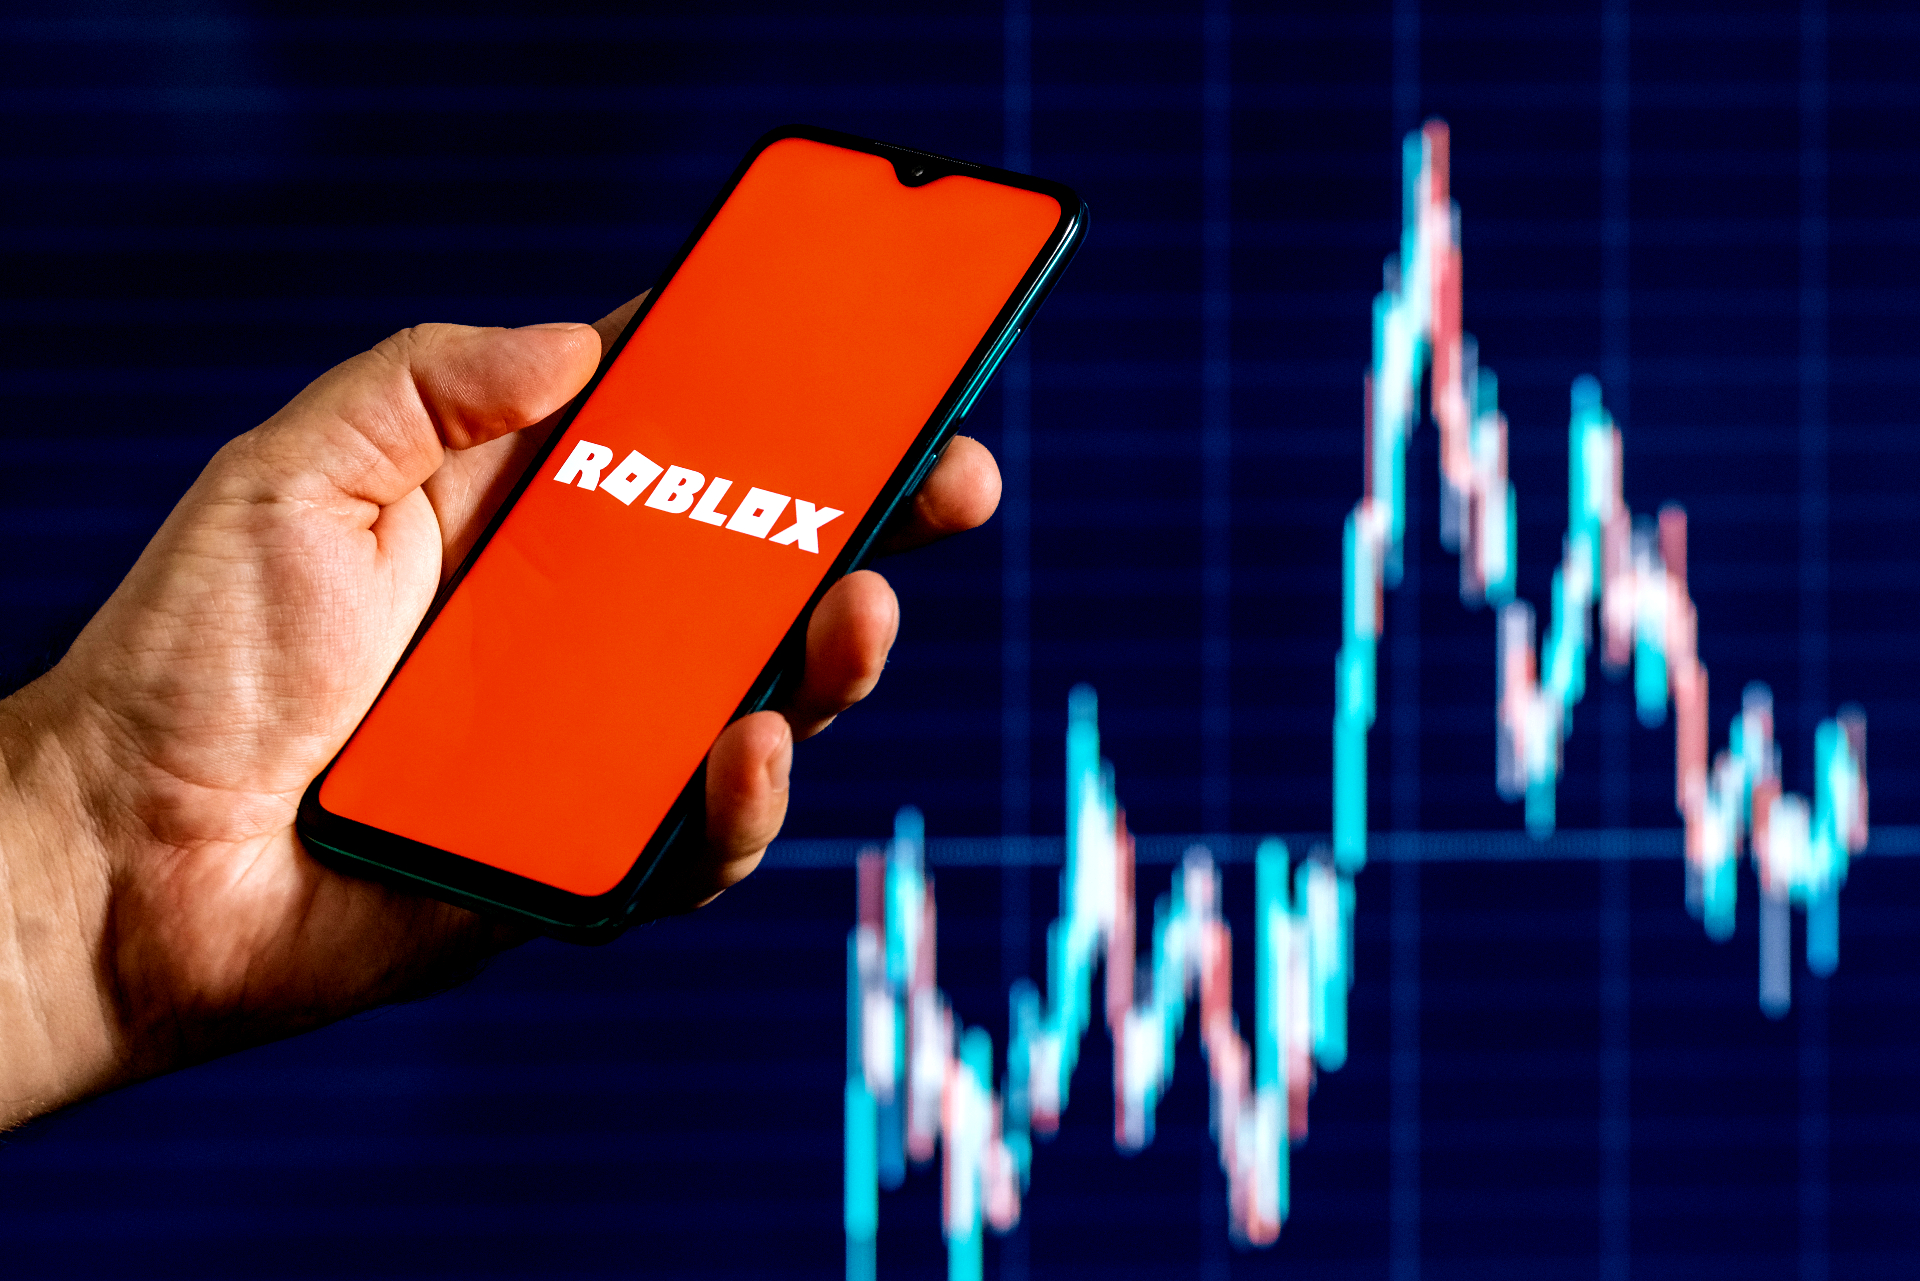 Gulfbrokers | Roblox stock rebounds 50% after earnings report: What next?